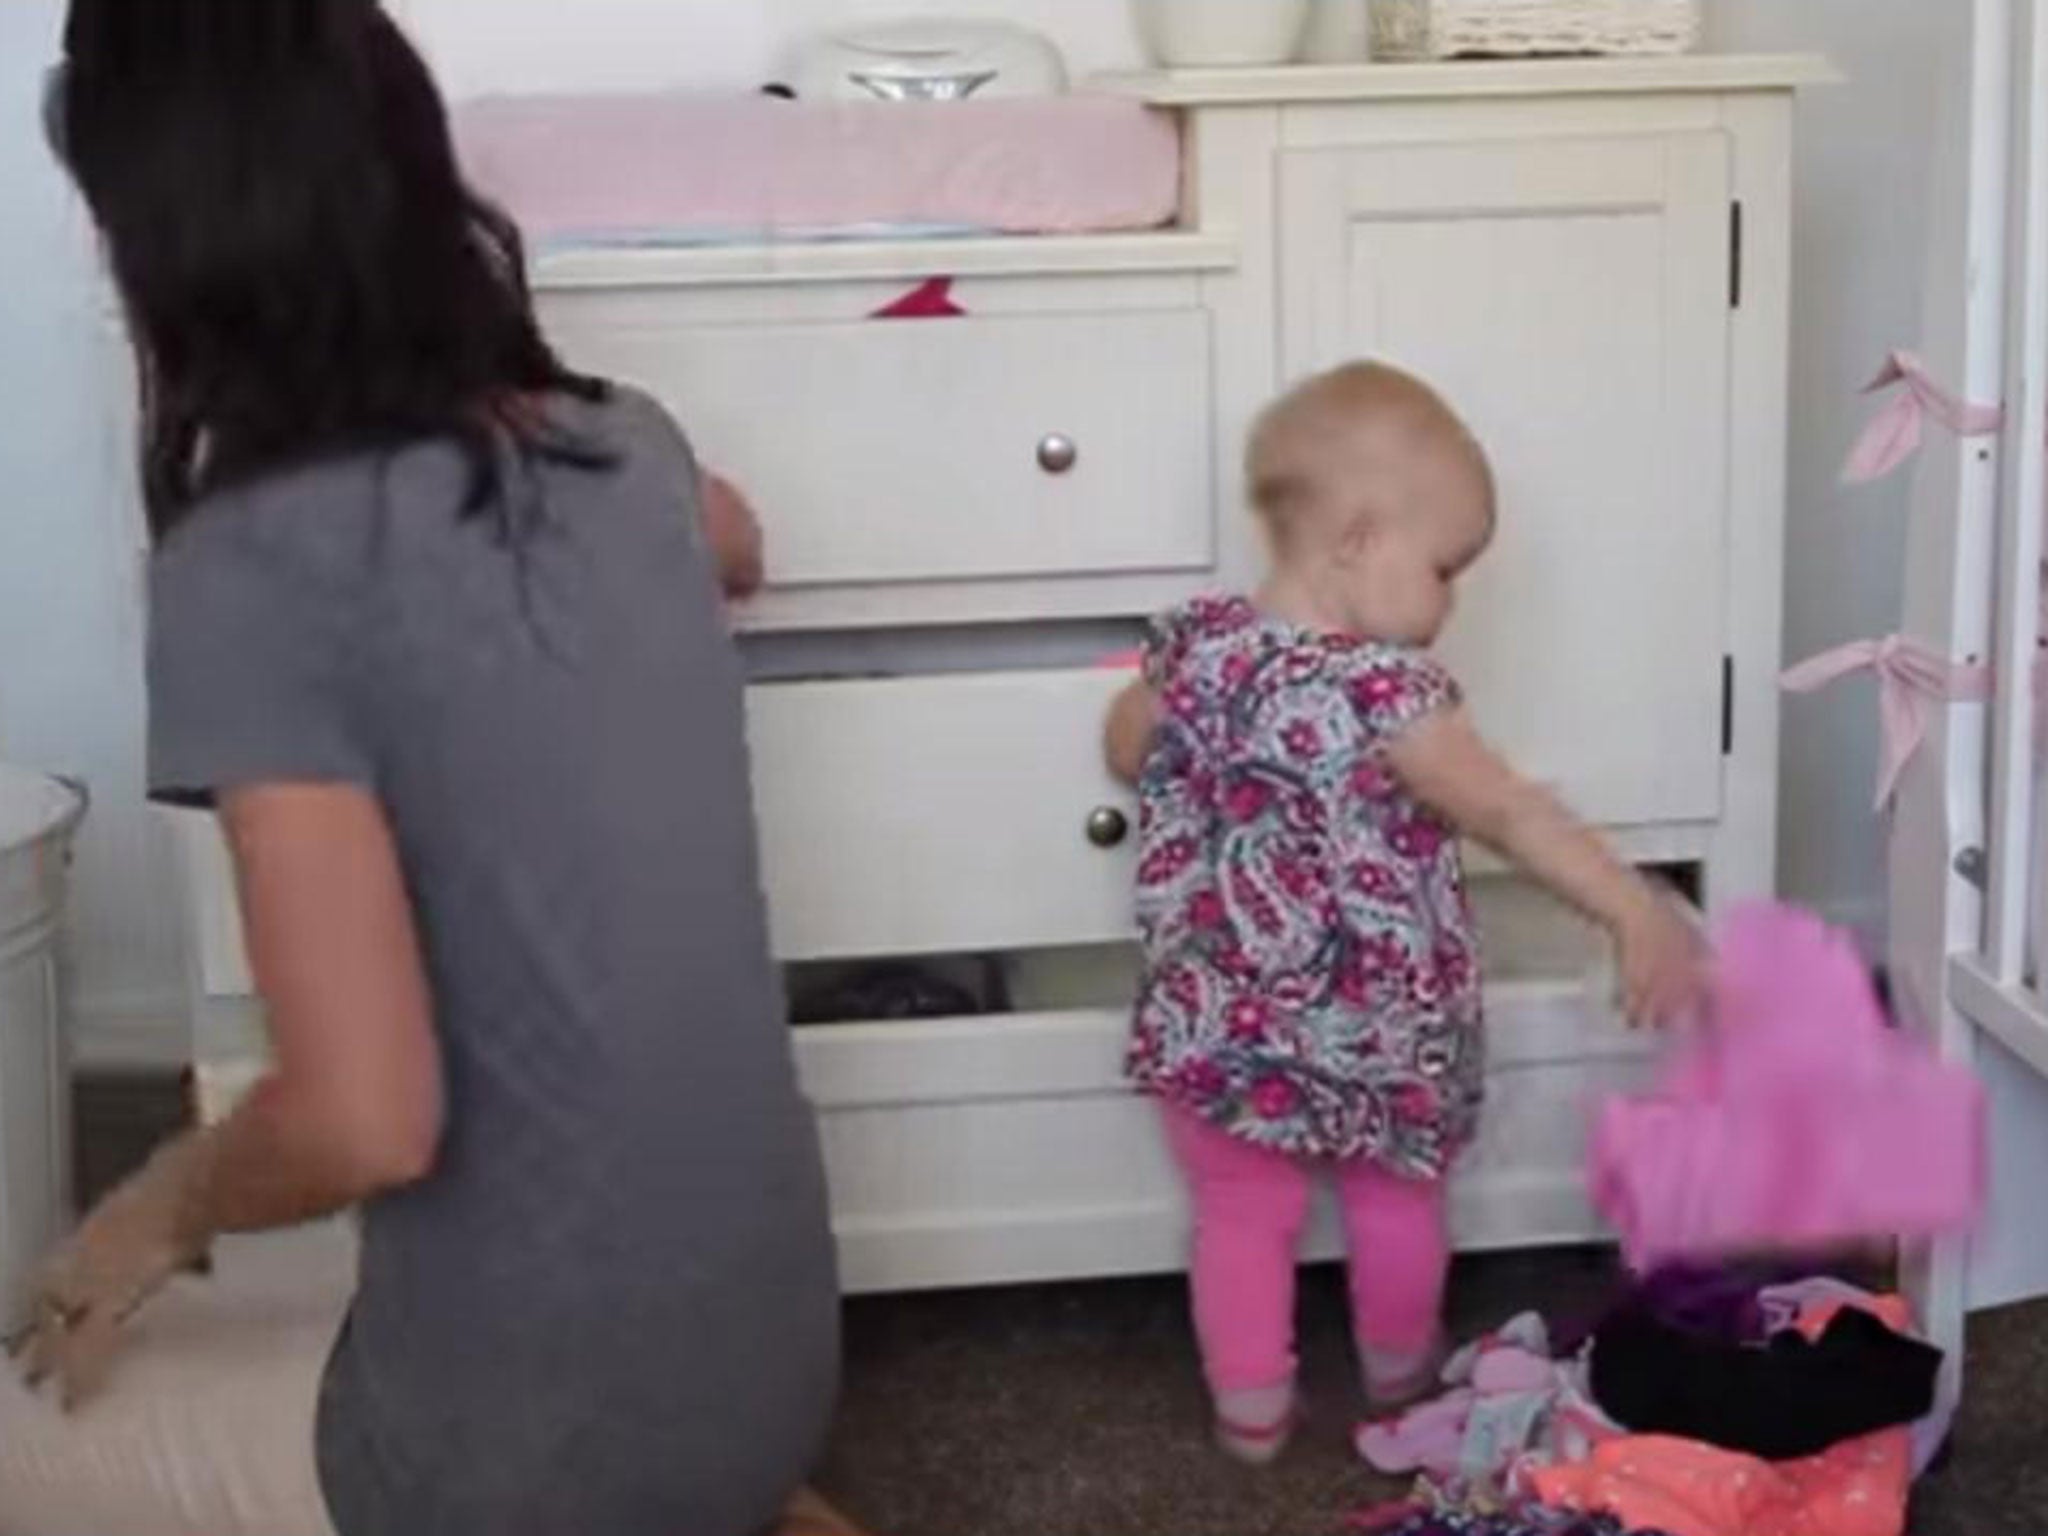 A baby 'helps' its mother by pulling all of the clothes out of the drawer